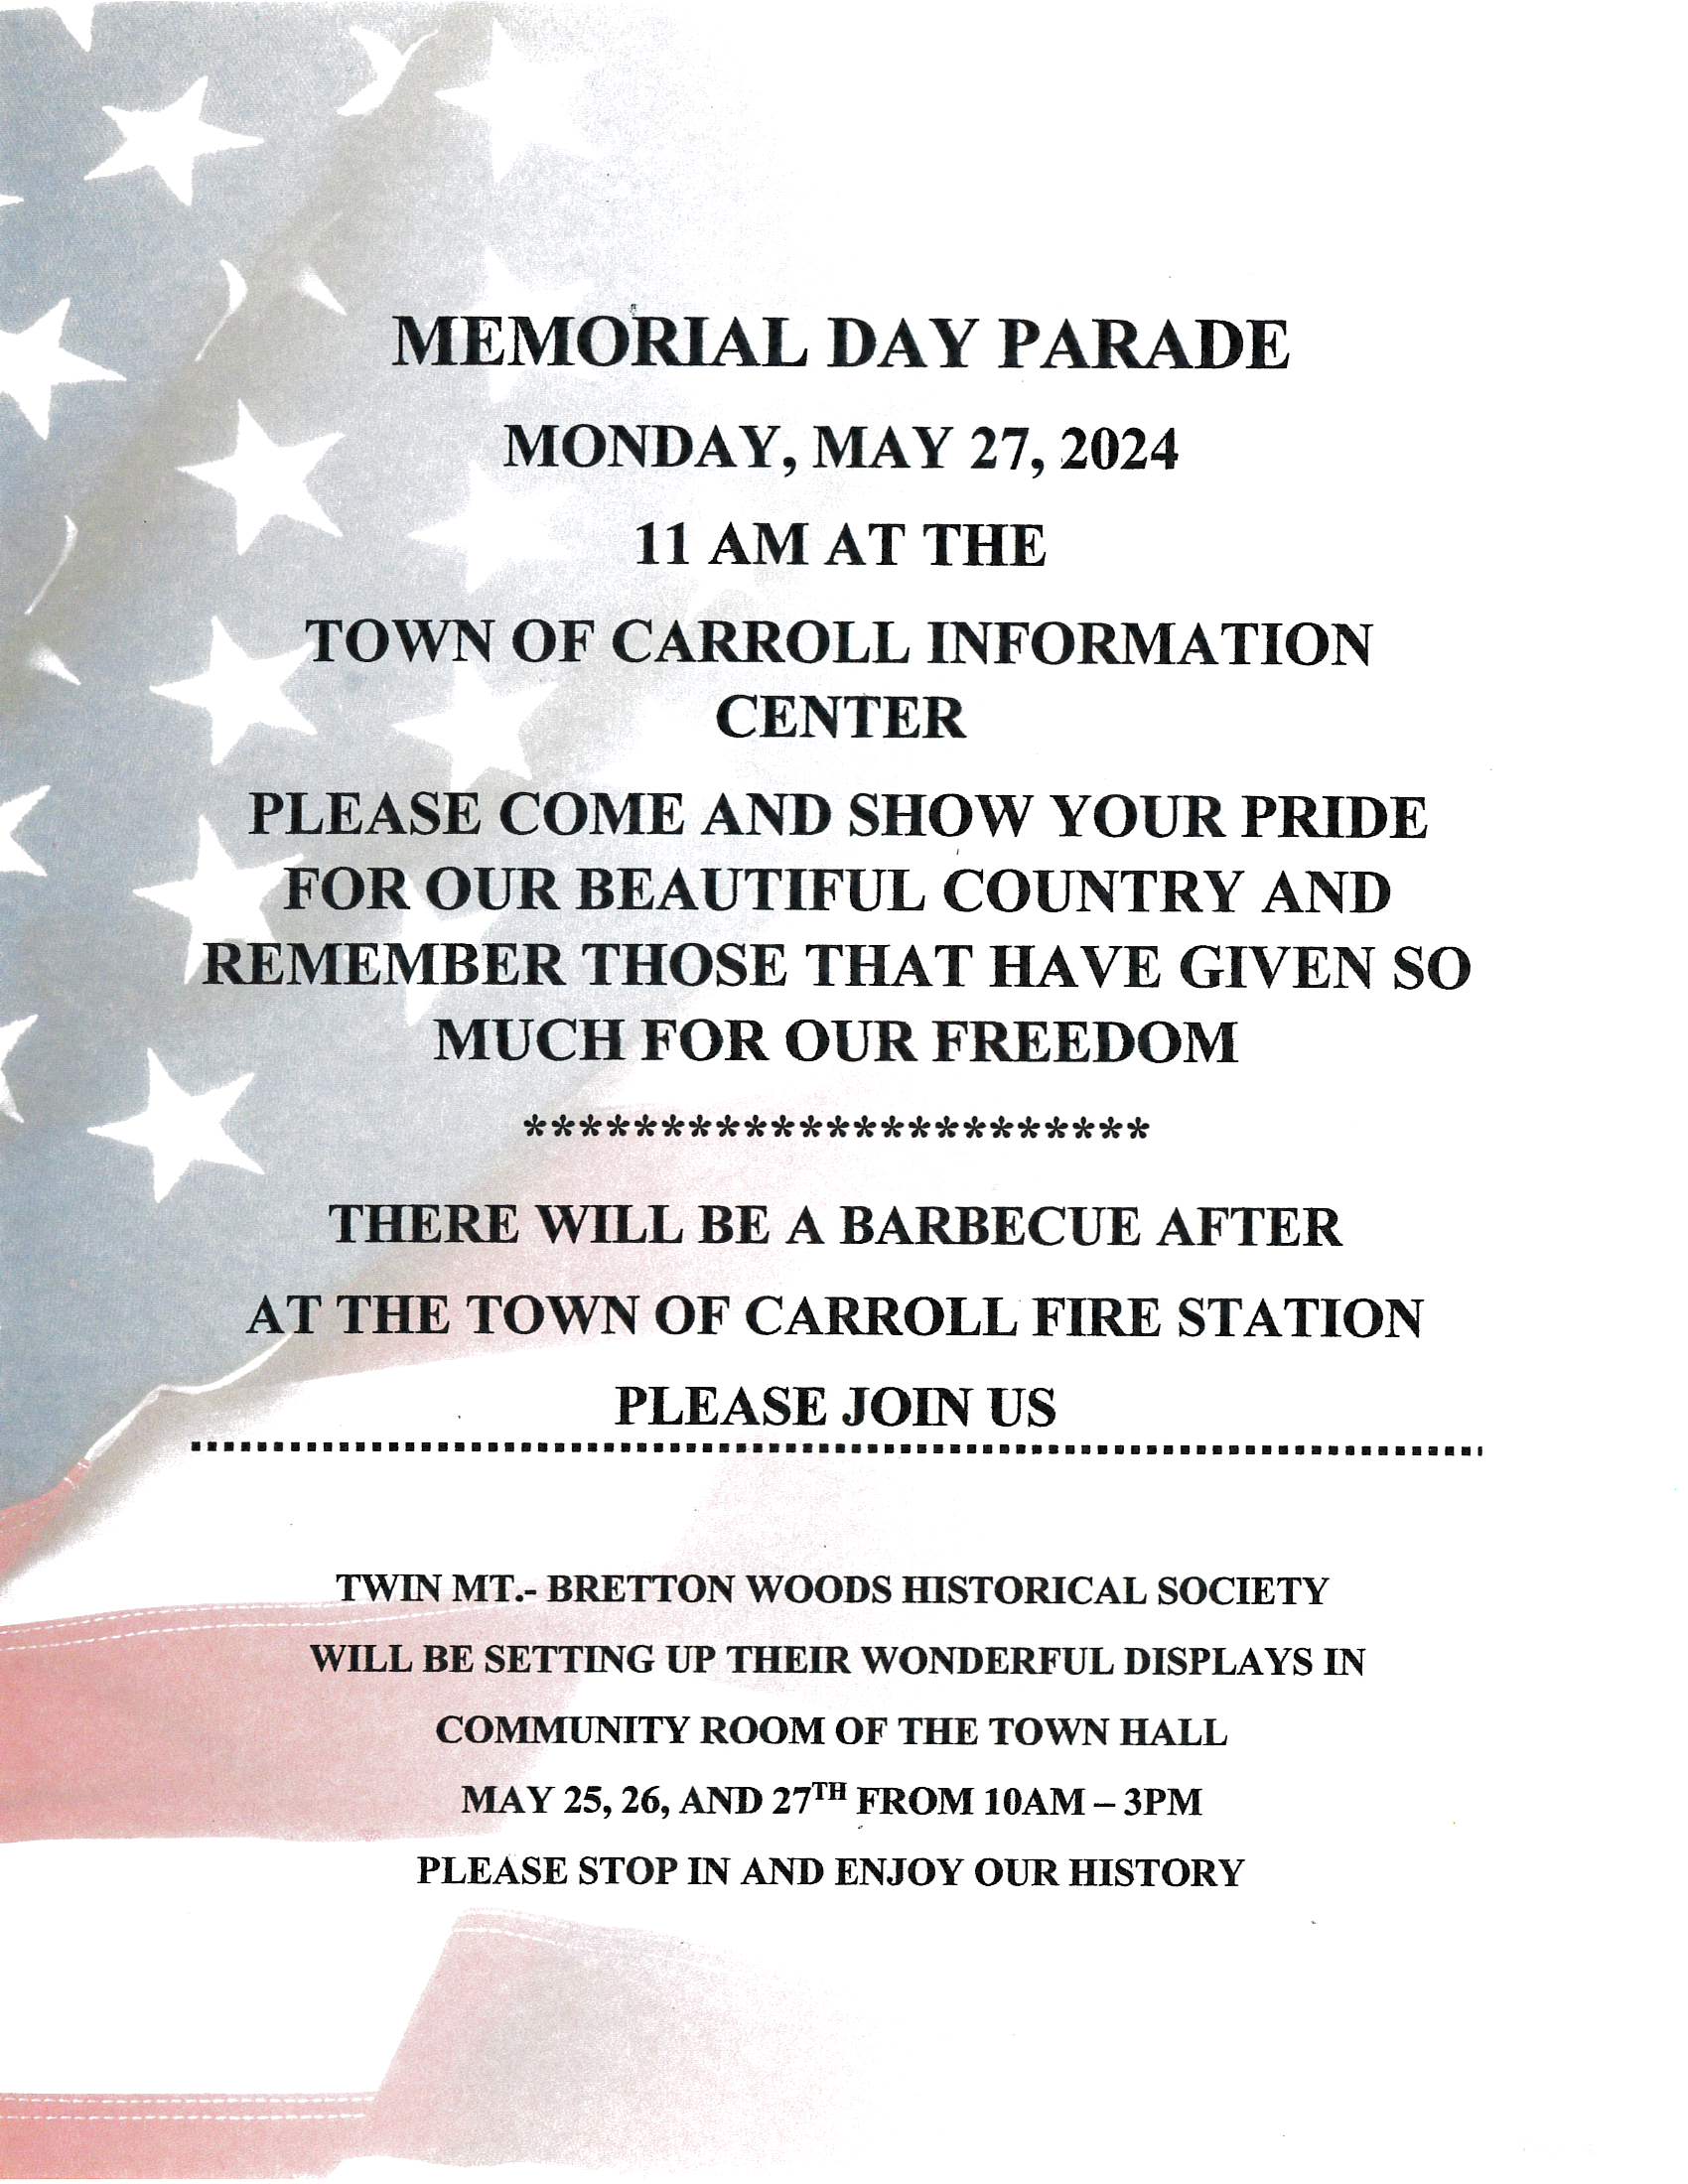 Memorial Day Parade @ Town of Carroll Information Center & Town Hall Community Room